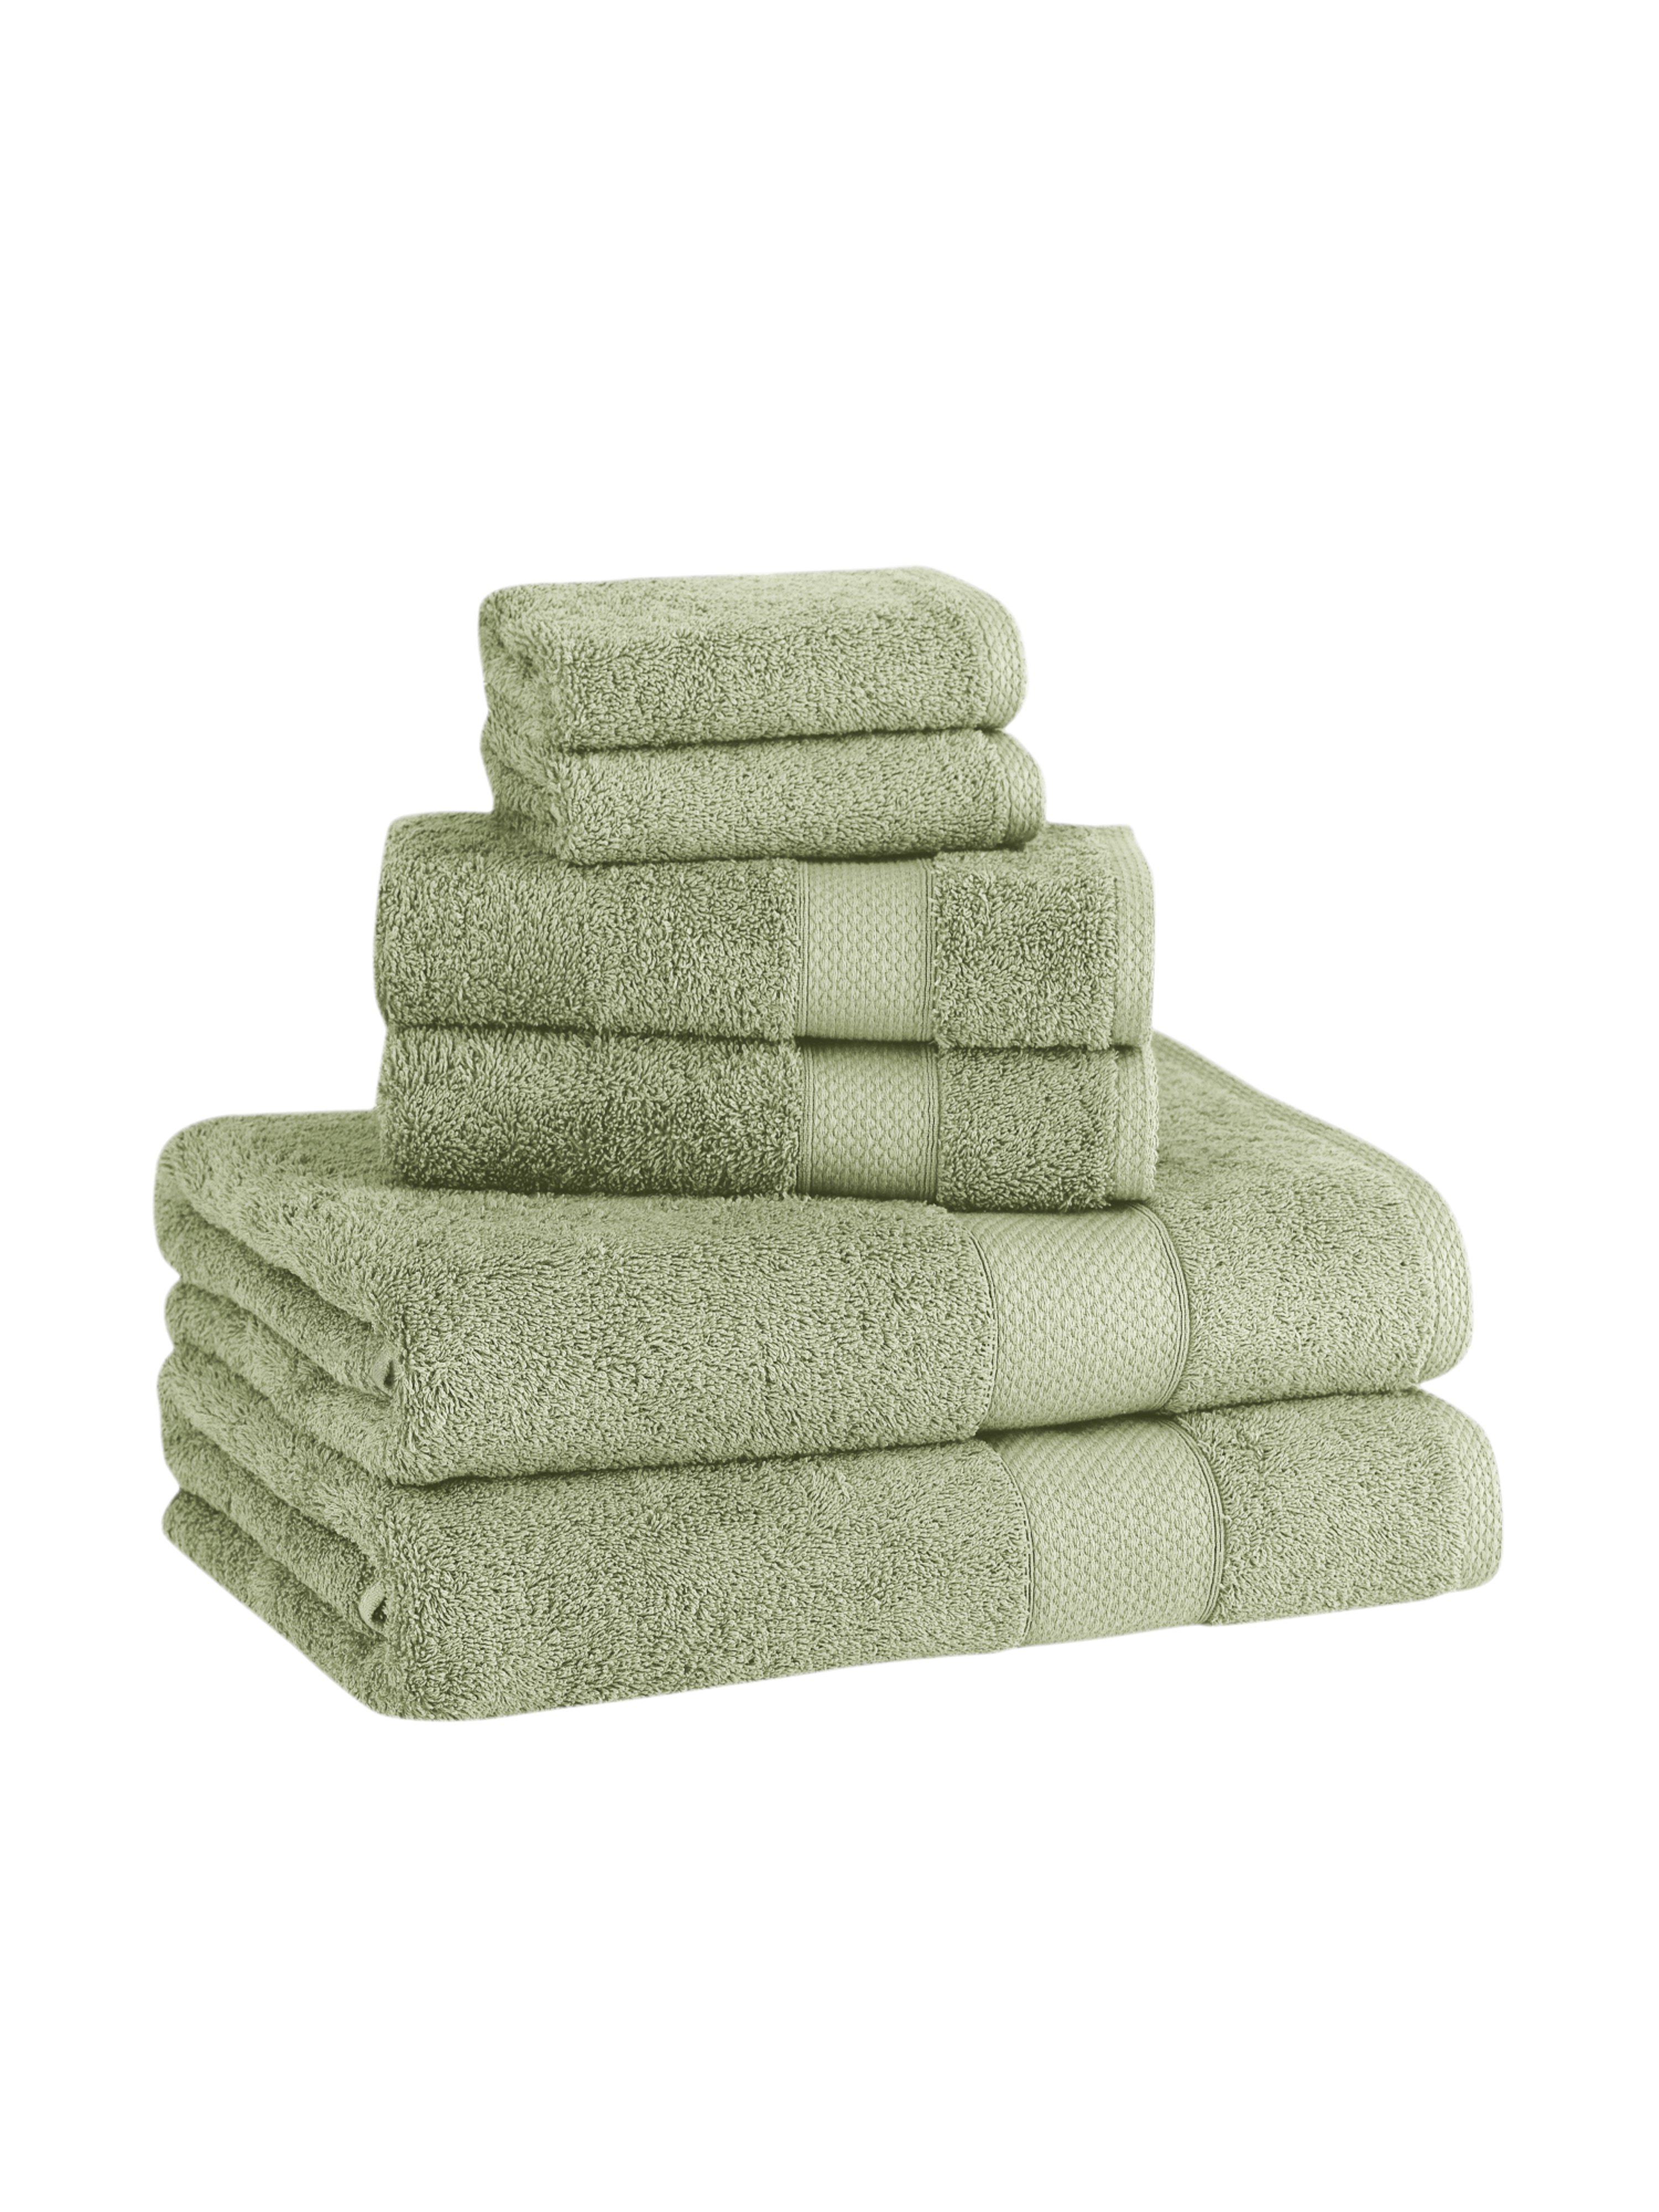 Classic Turkish Towels Genuine Cotton Soft Absorbent Luxury Madison 6 Piece S In Green